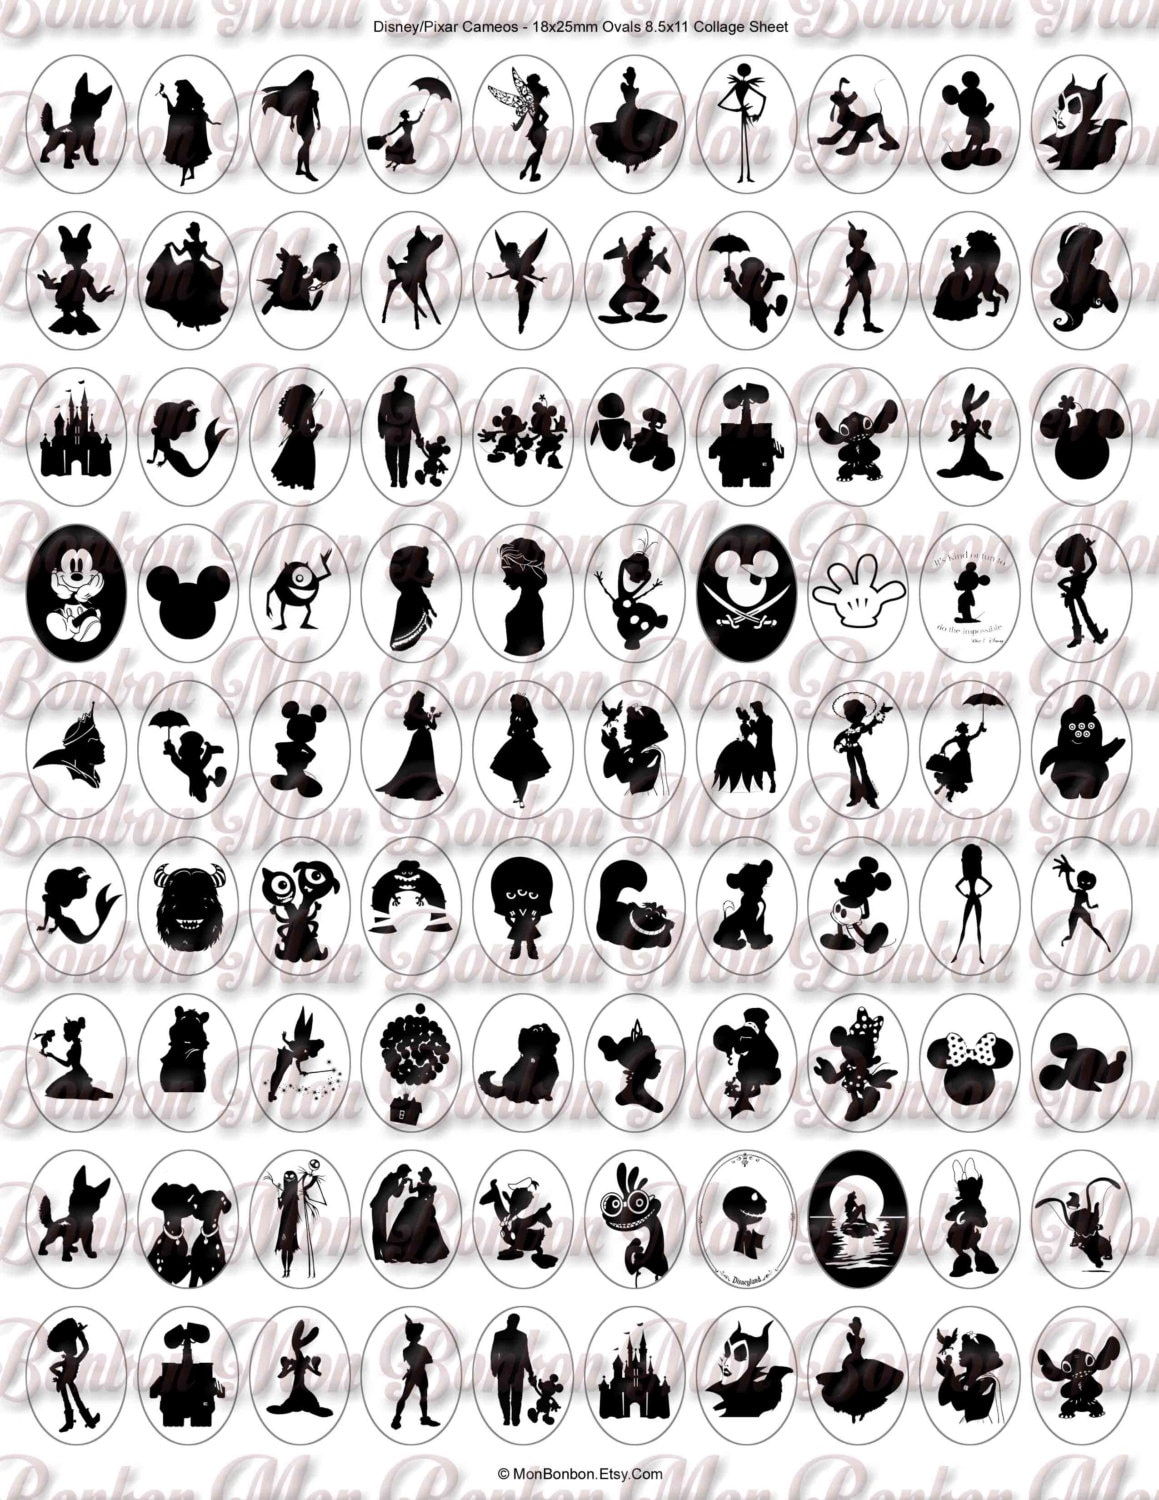 Disney Pixar Cameos and Silhouettes Jewelry Supply 18x25mm